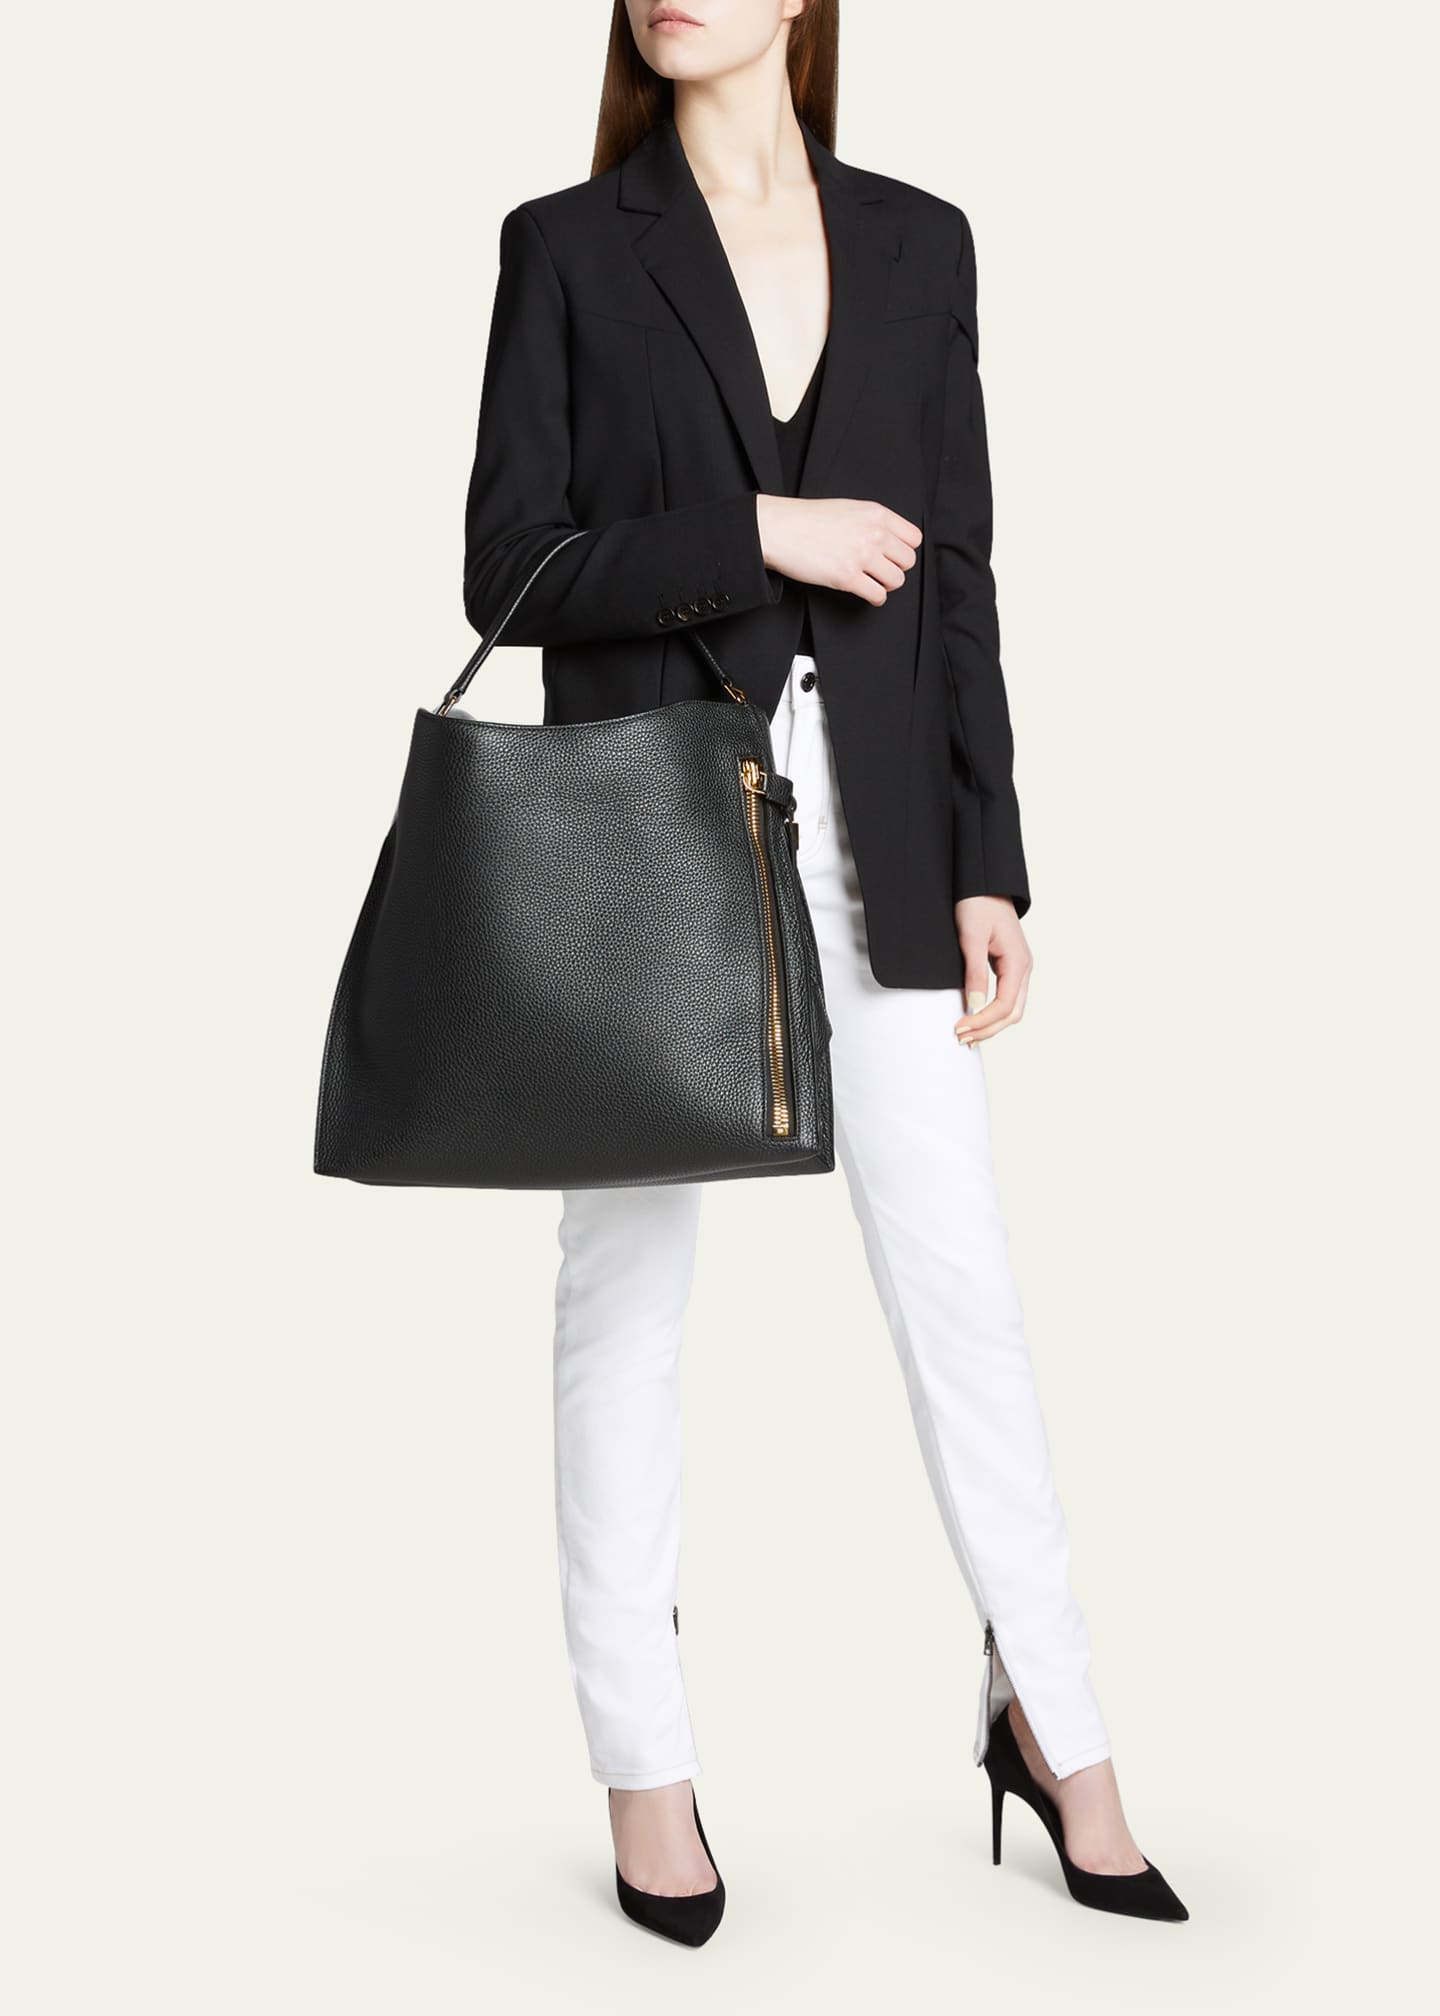 TOM FORD Alix Hobo Large in Grained Leather - Bergdorf Goodman